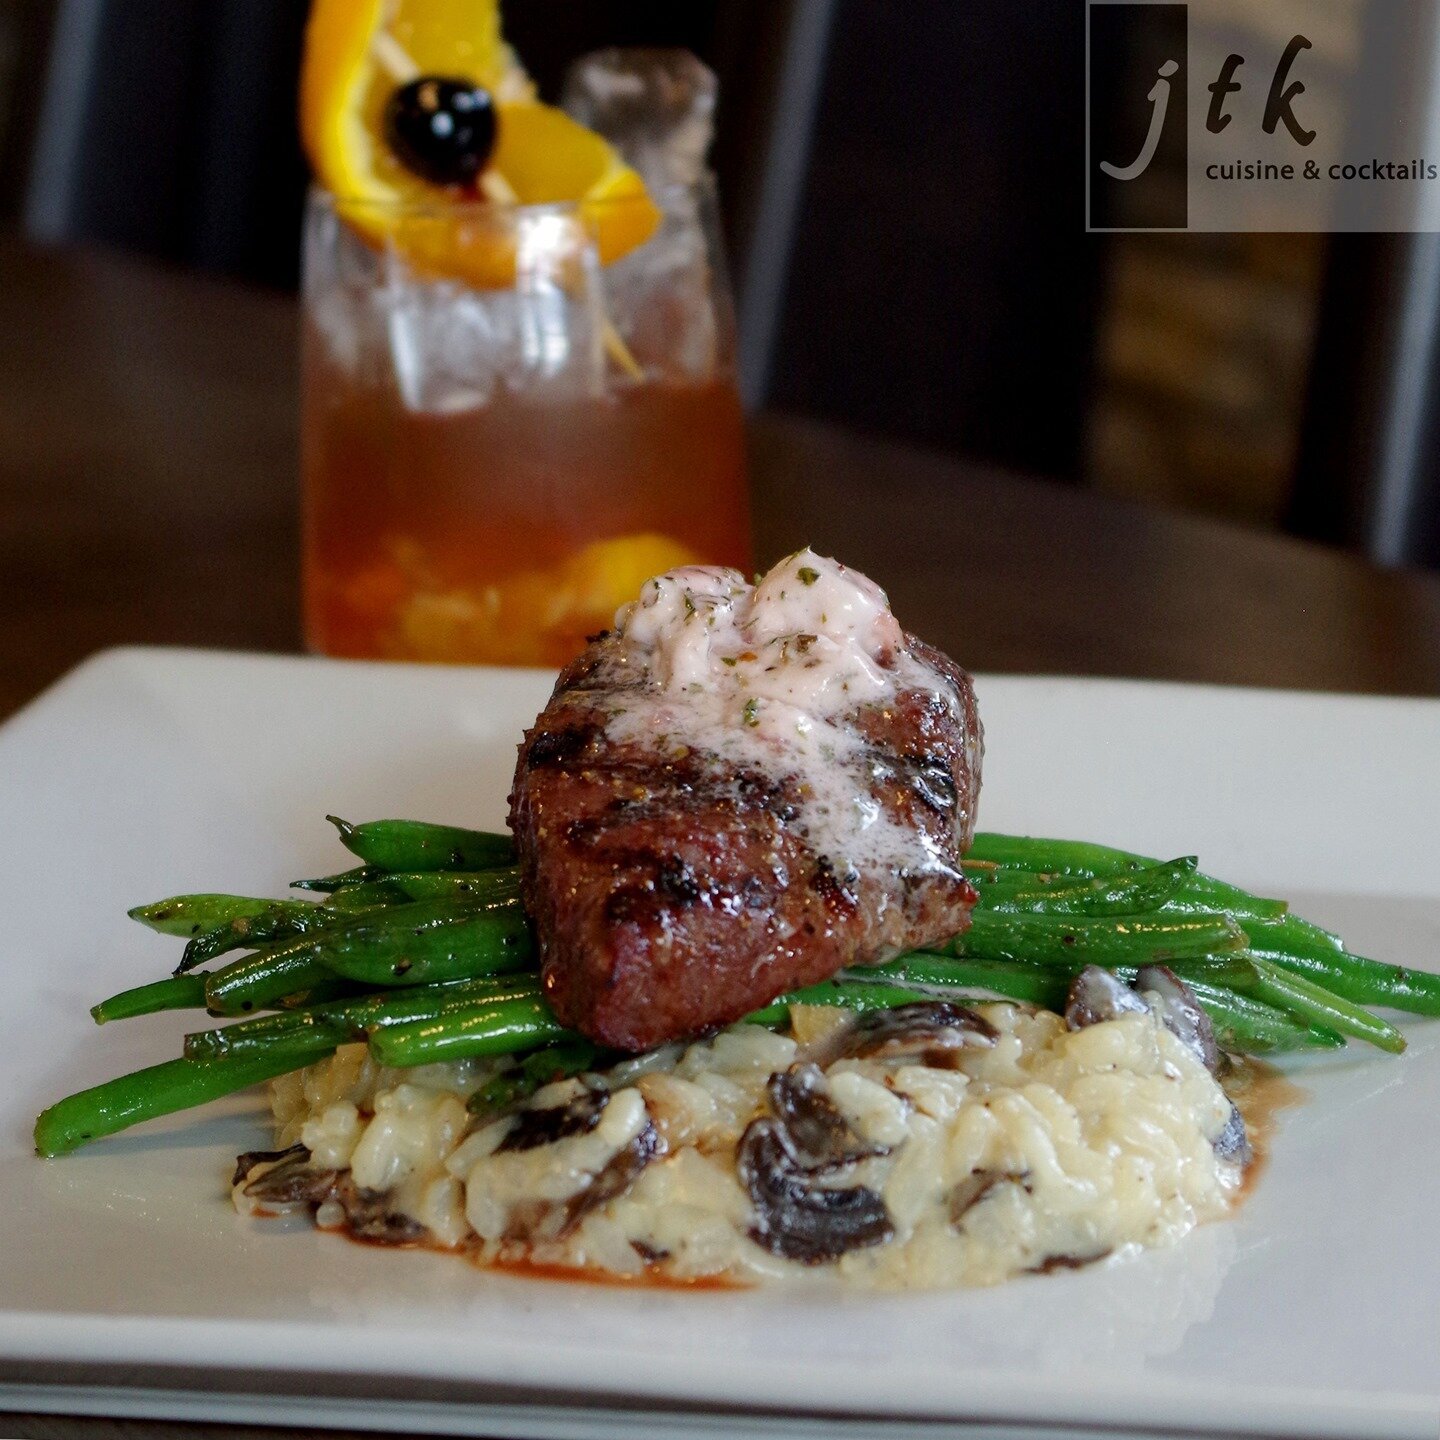 Give our Grilled Flatiron a try; on a bed of creamy mushroom risotto paired with some French cut green beans, we then top it with red wine compound butter!⠀⠀⠀
⠀⠀⠀
#jtklnk #downtownlincoln #mylnk #lincolnhaymarket #restaurant #steak #flatiron #lincoln